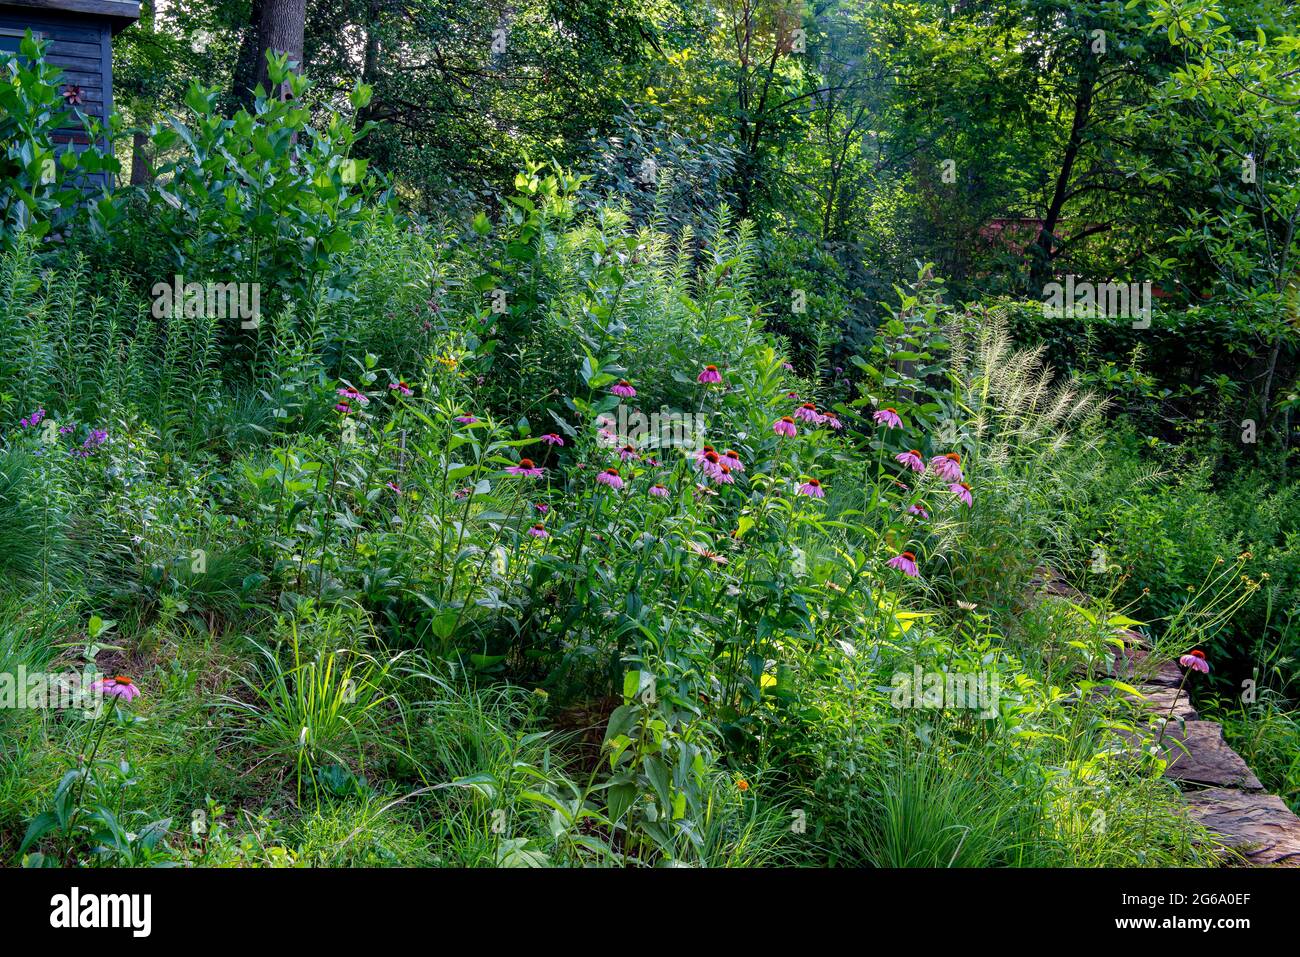 Backyard wildflower garden in central Virginia in June, with purple coneflowers, bottlebrush grass, and other native plants. Stock Photo